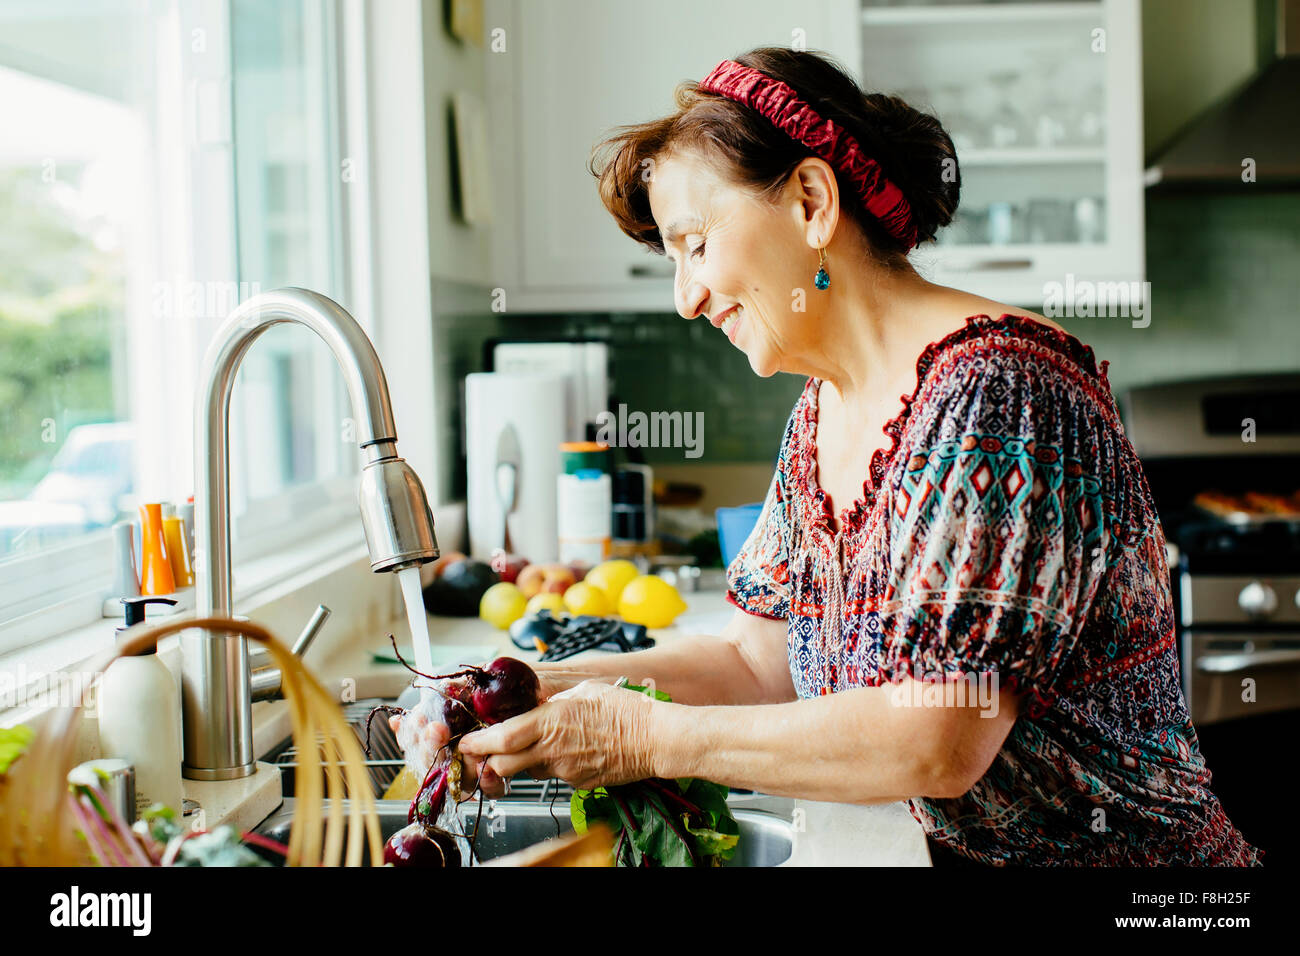 Caucasian woman washing vegetables in kitchen Stock Photo